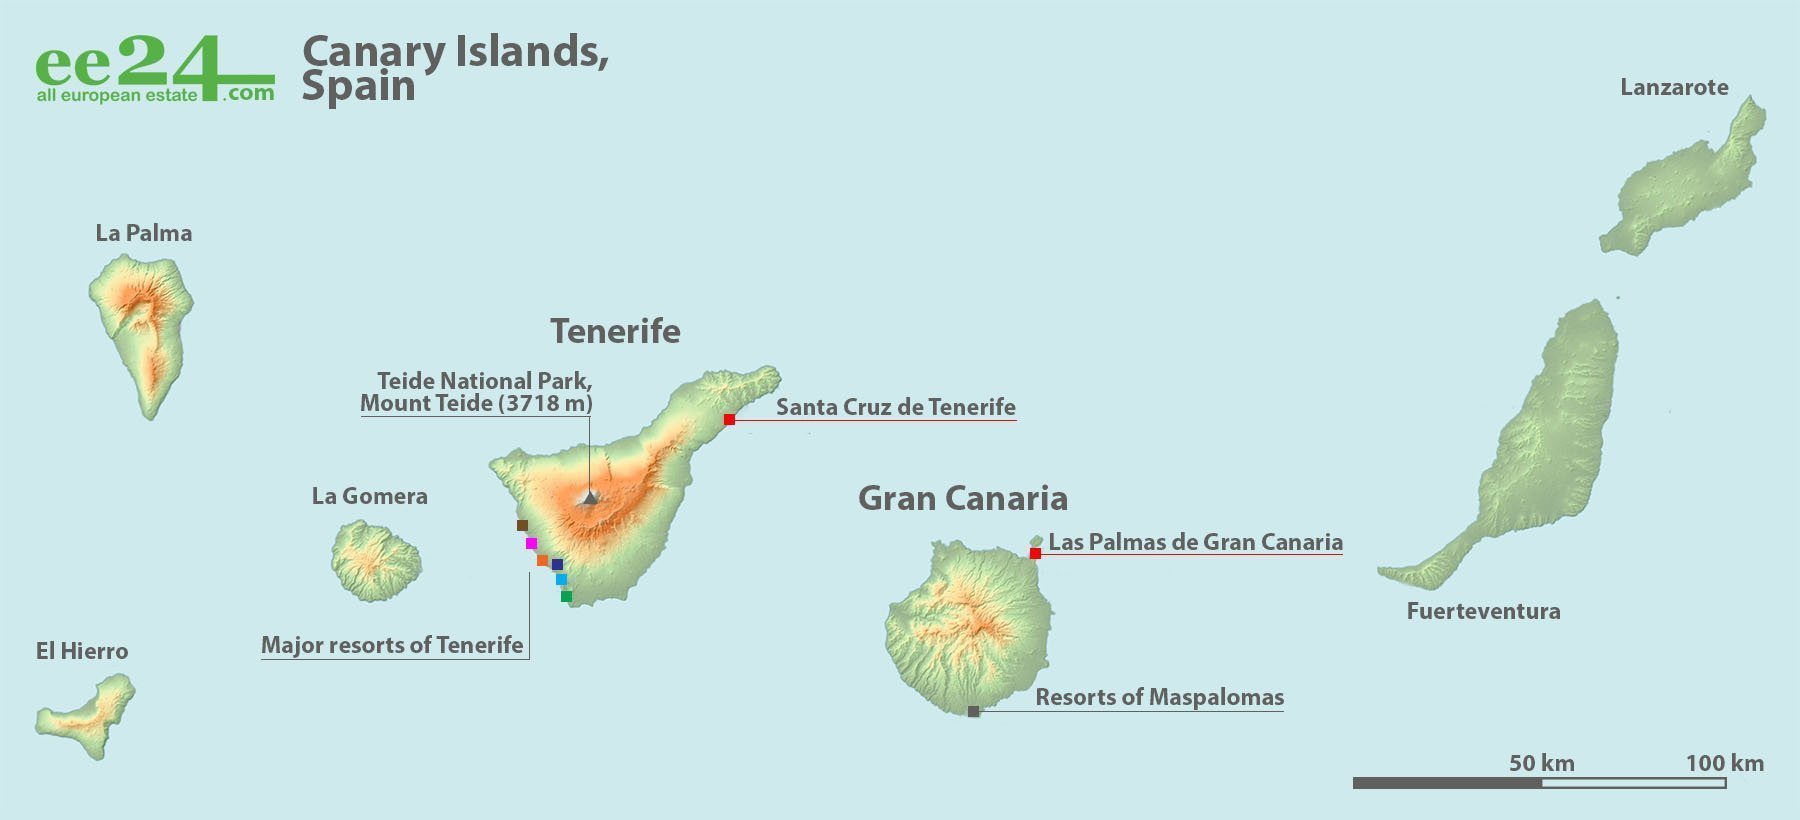 The Canaries: islands with affordable Spanish property | Photo 1 | ee24